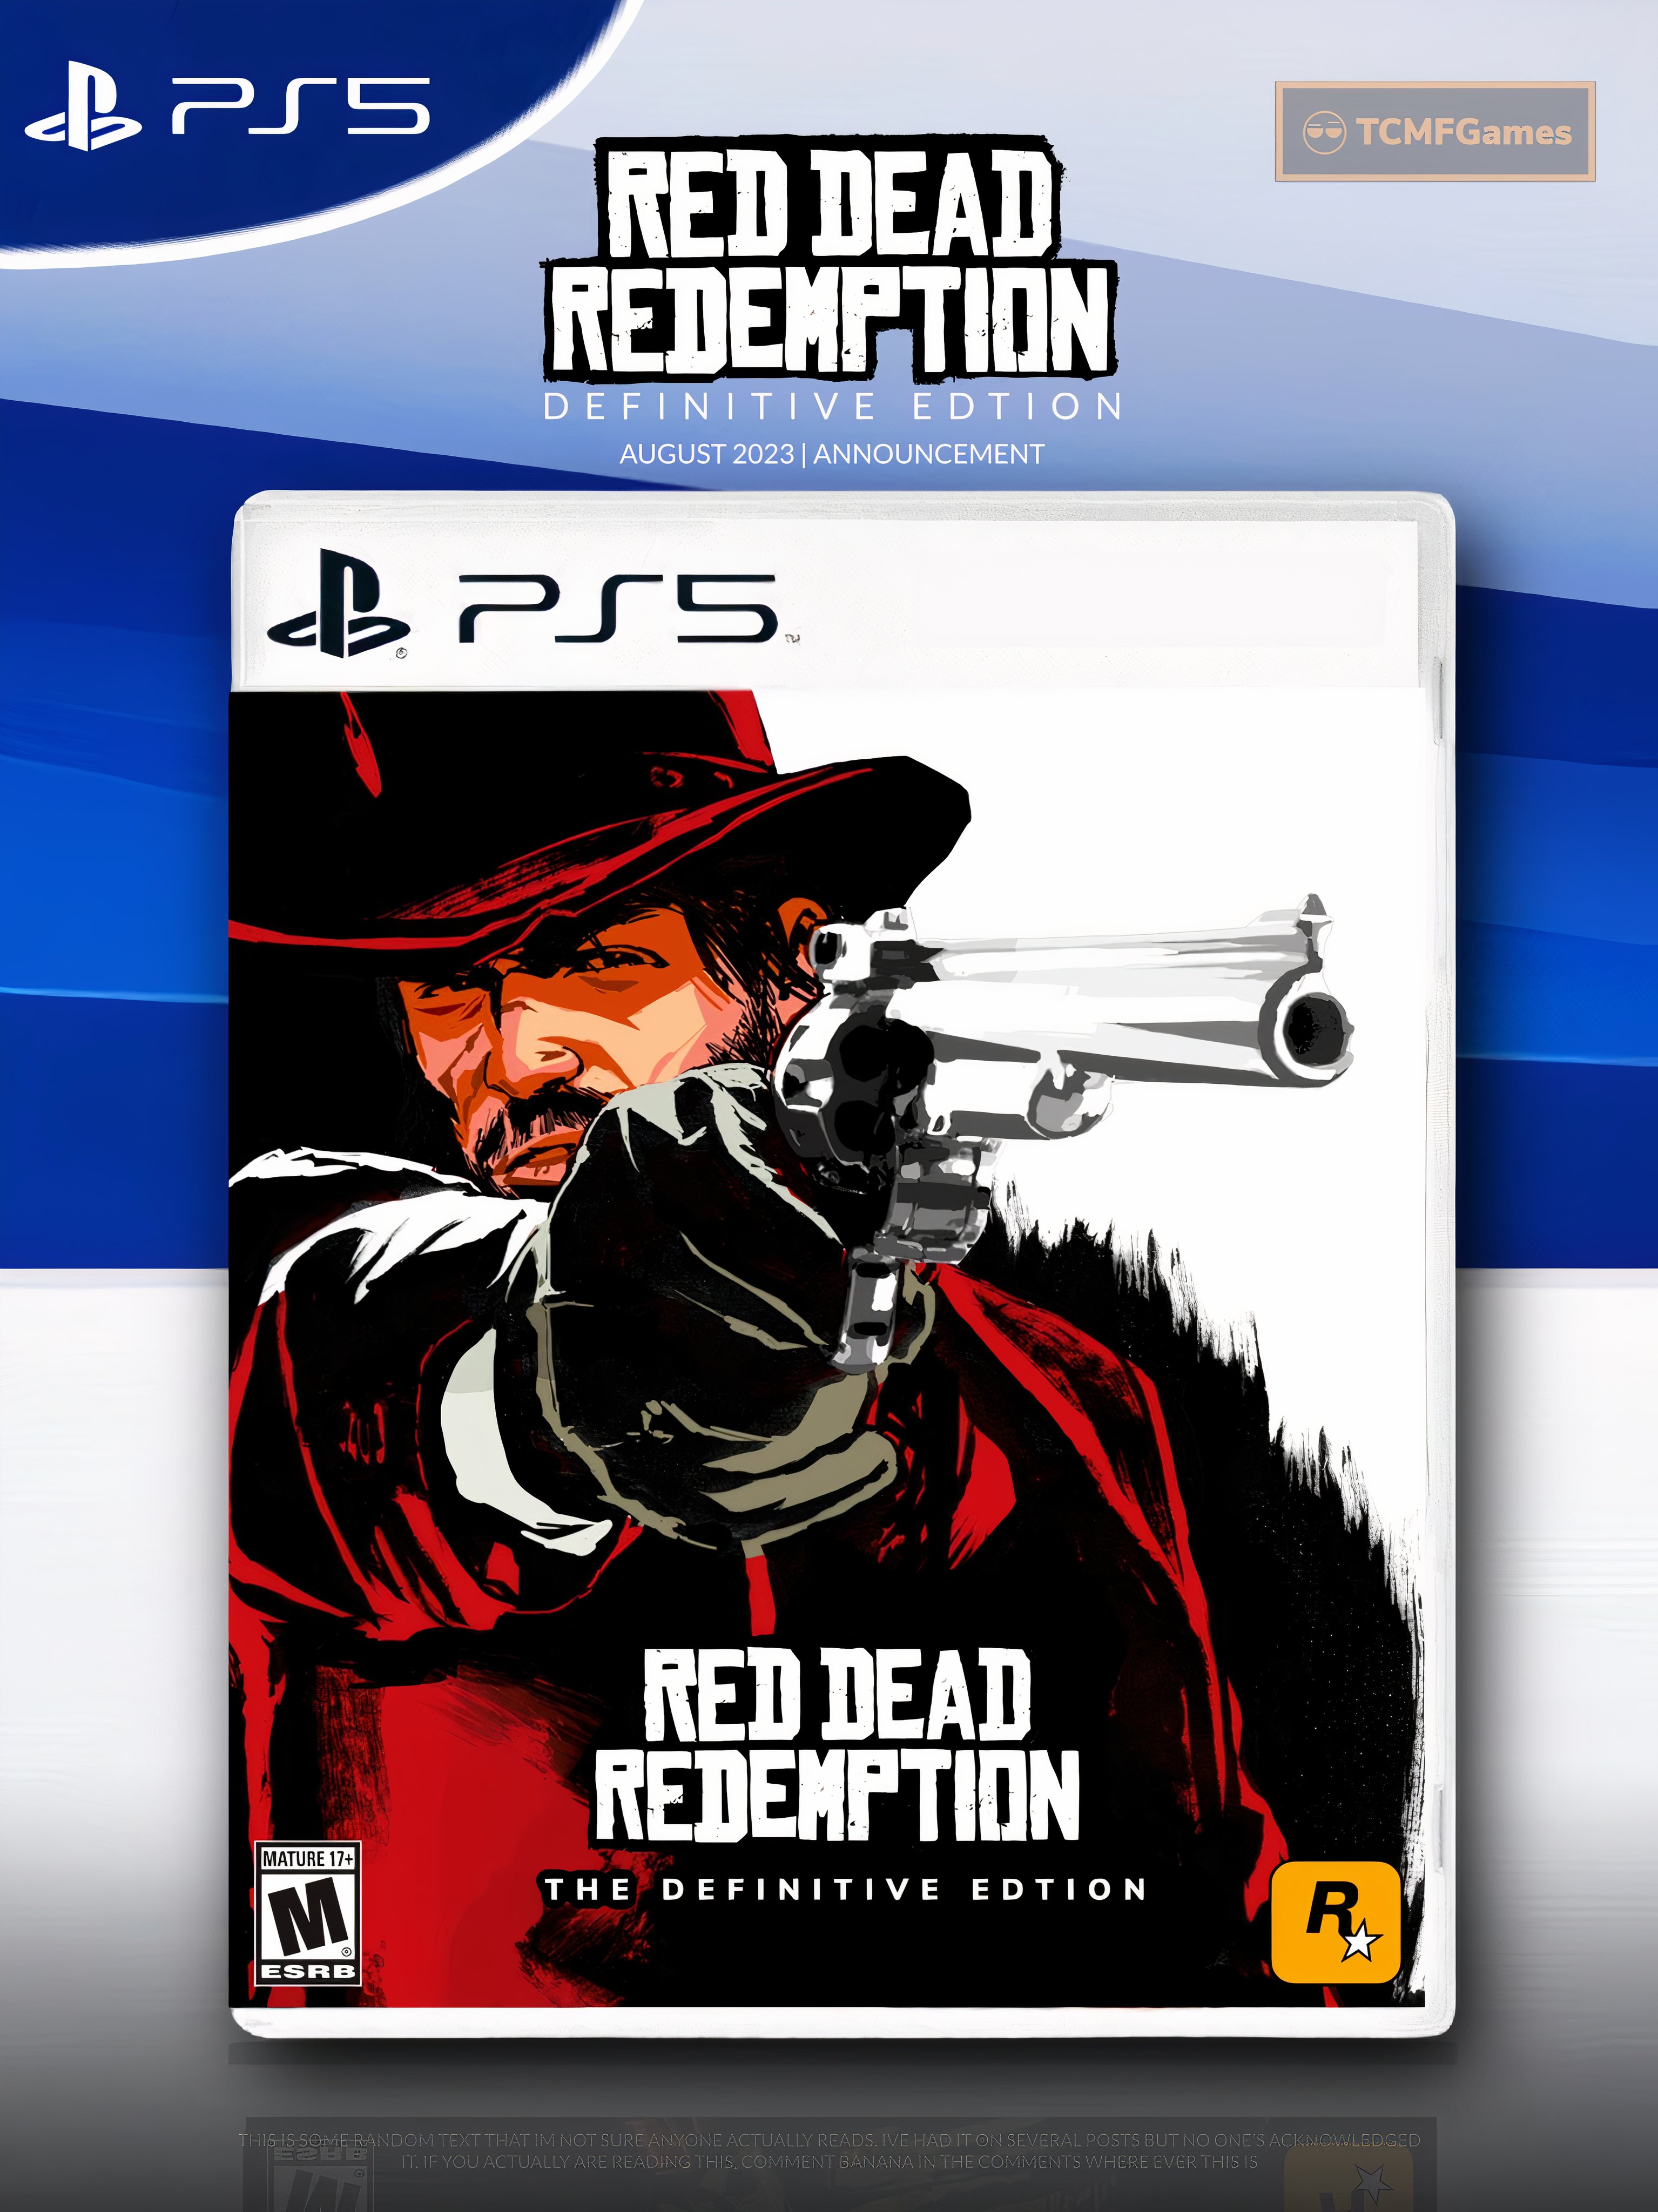 TCMFGames on X: Red Dead Redemption Remastered for PS5 reveal